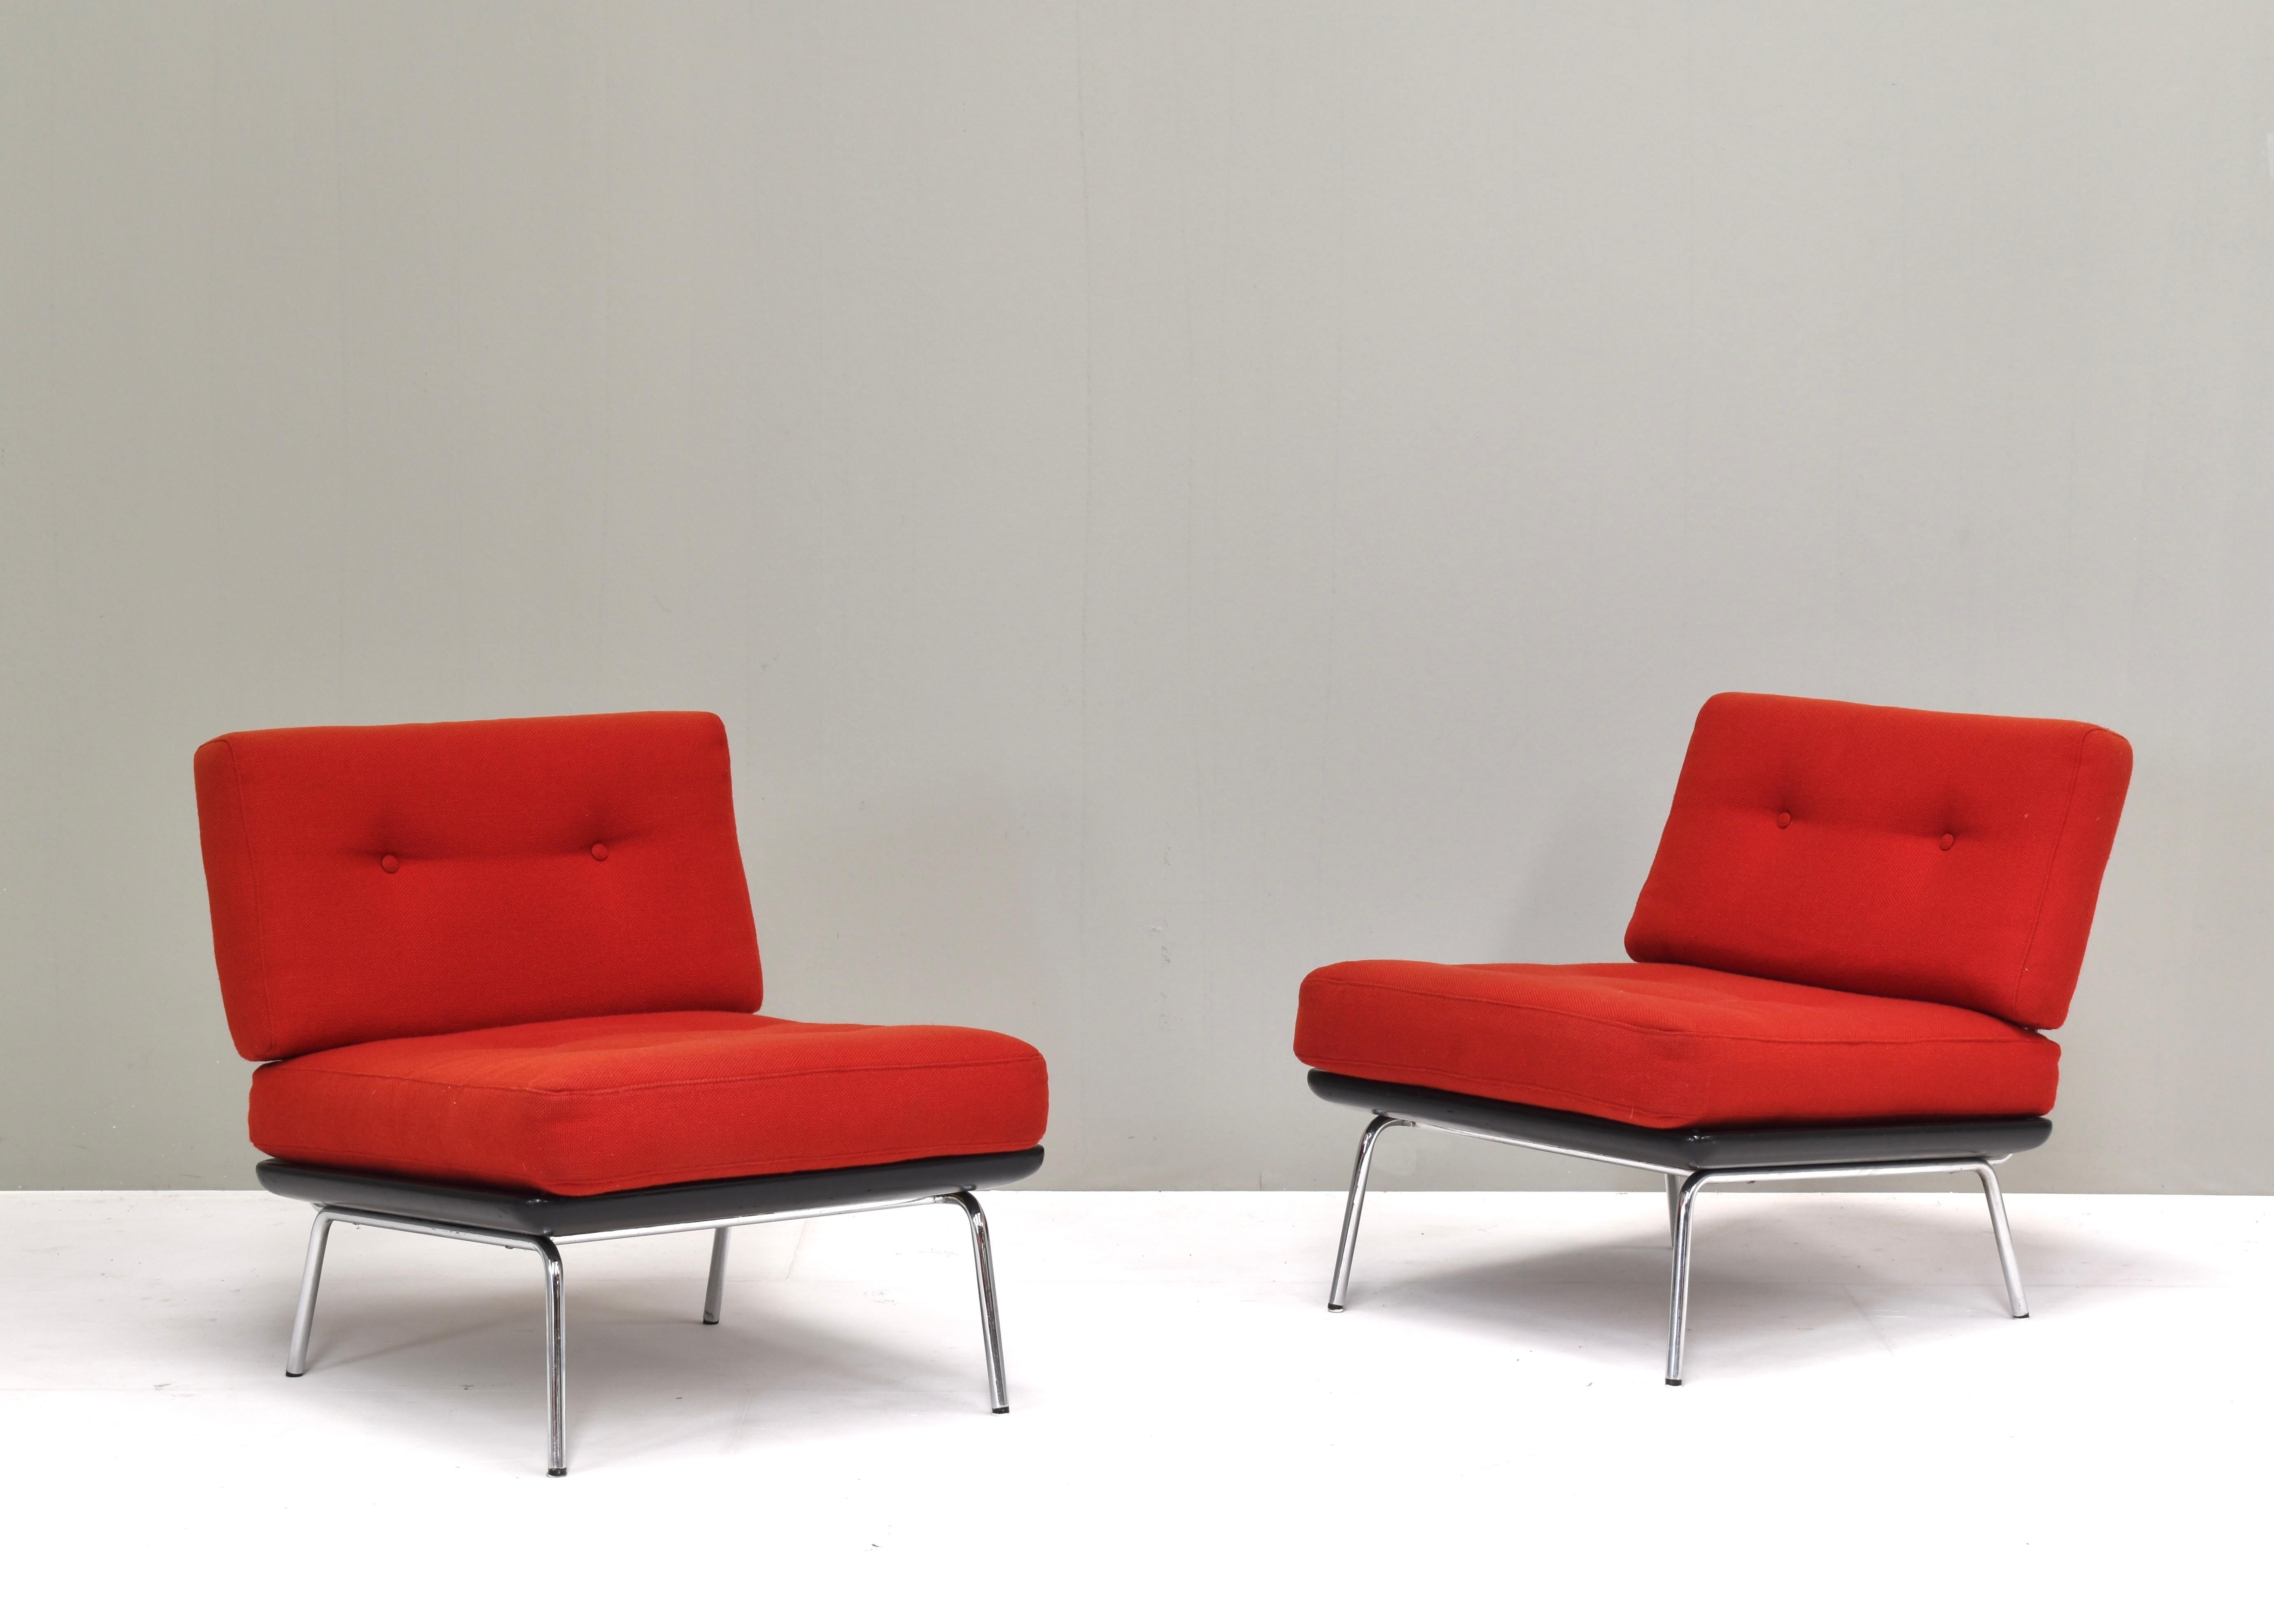 Minimalistic pair of lounge chairs by or in the style of Martin Visser or Kho Liang Ie - Netherlands, circa 1960.
Designer: By or in the style of Martin Visser or Kho Liang Ie
Manufacturer: By or in the style of ‘t Spectrum or Artifort
Country: